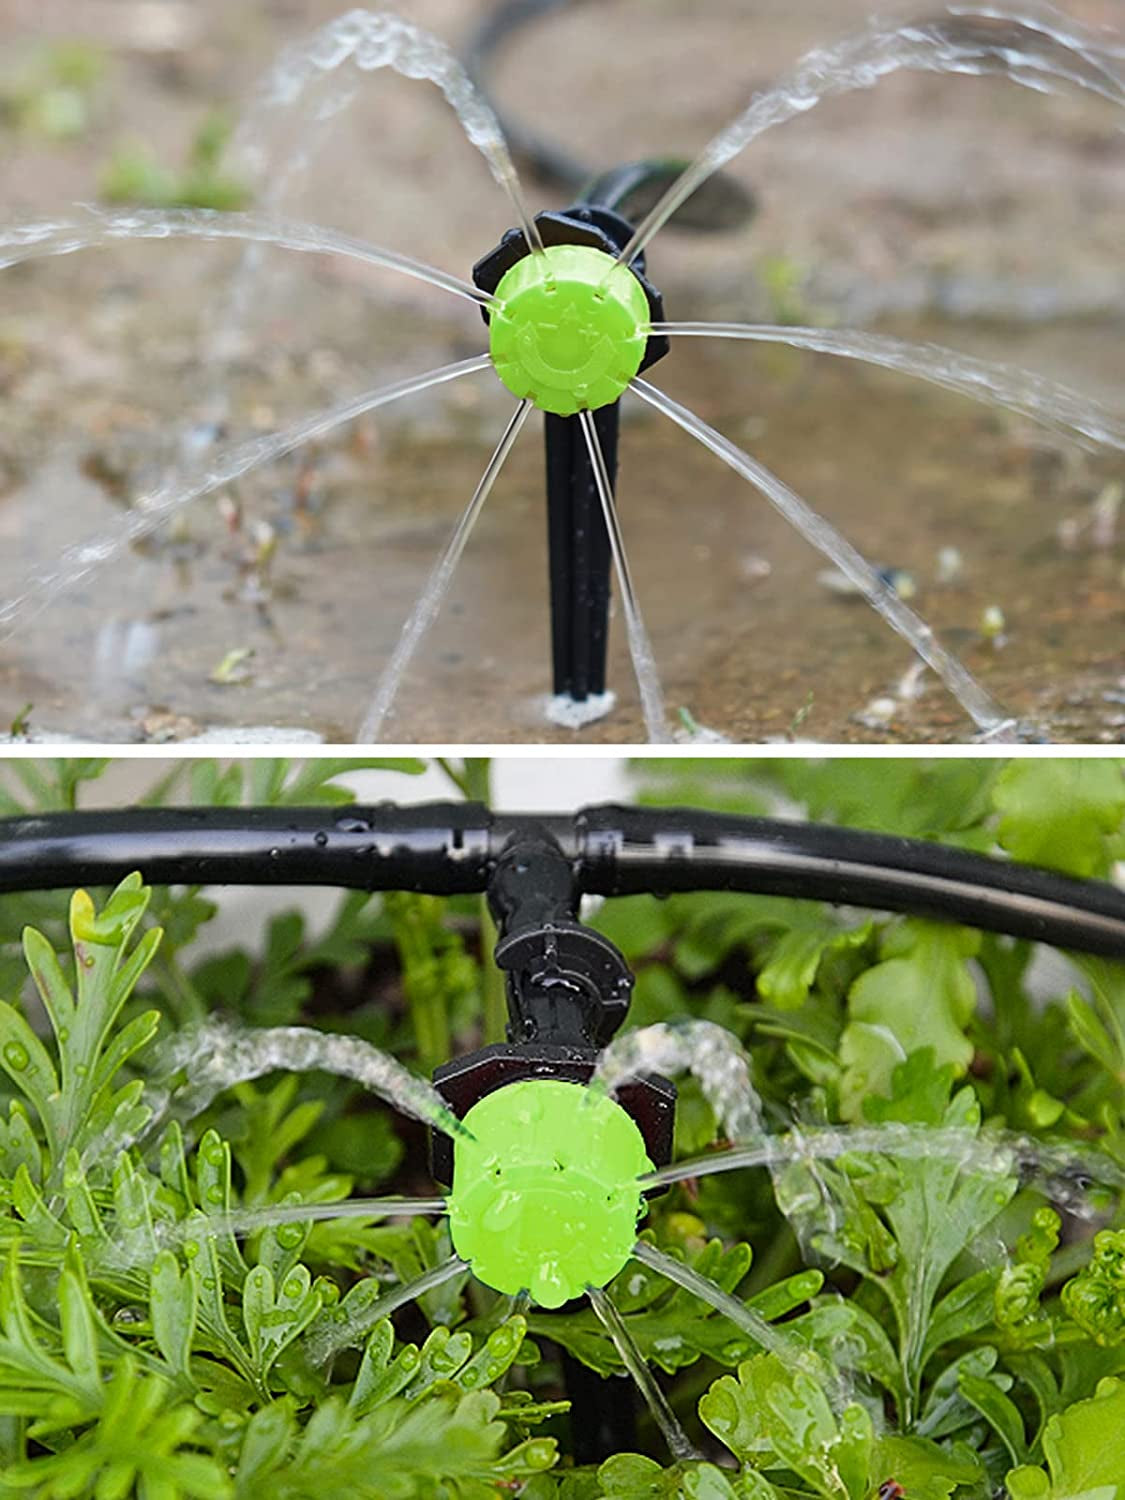 150PCS Automatic Drip Irrigation Kit Plant Watering System Adjustable Micro Flow Drip Irrigation Dripper Sprinklers, Tee Pipes, Hose Support Stakes for Gardens, Lawns, Greenhouses(Green)